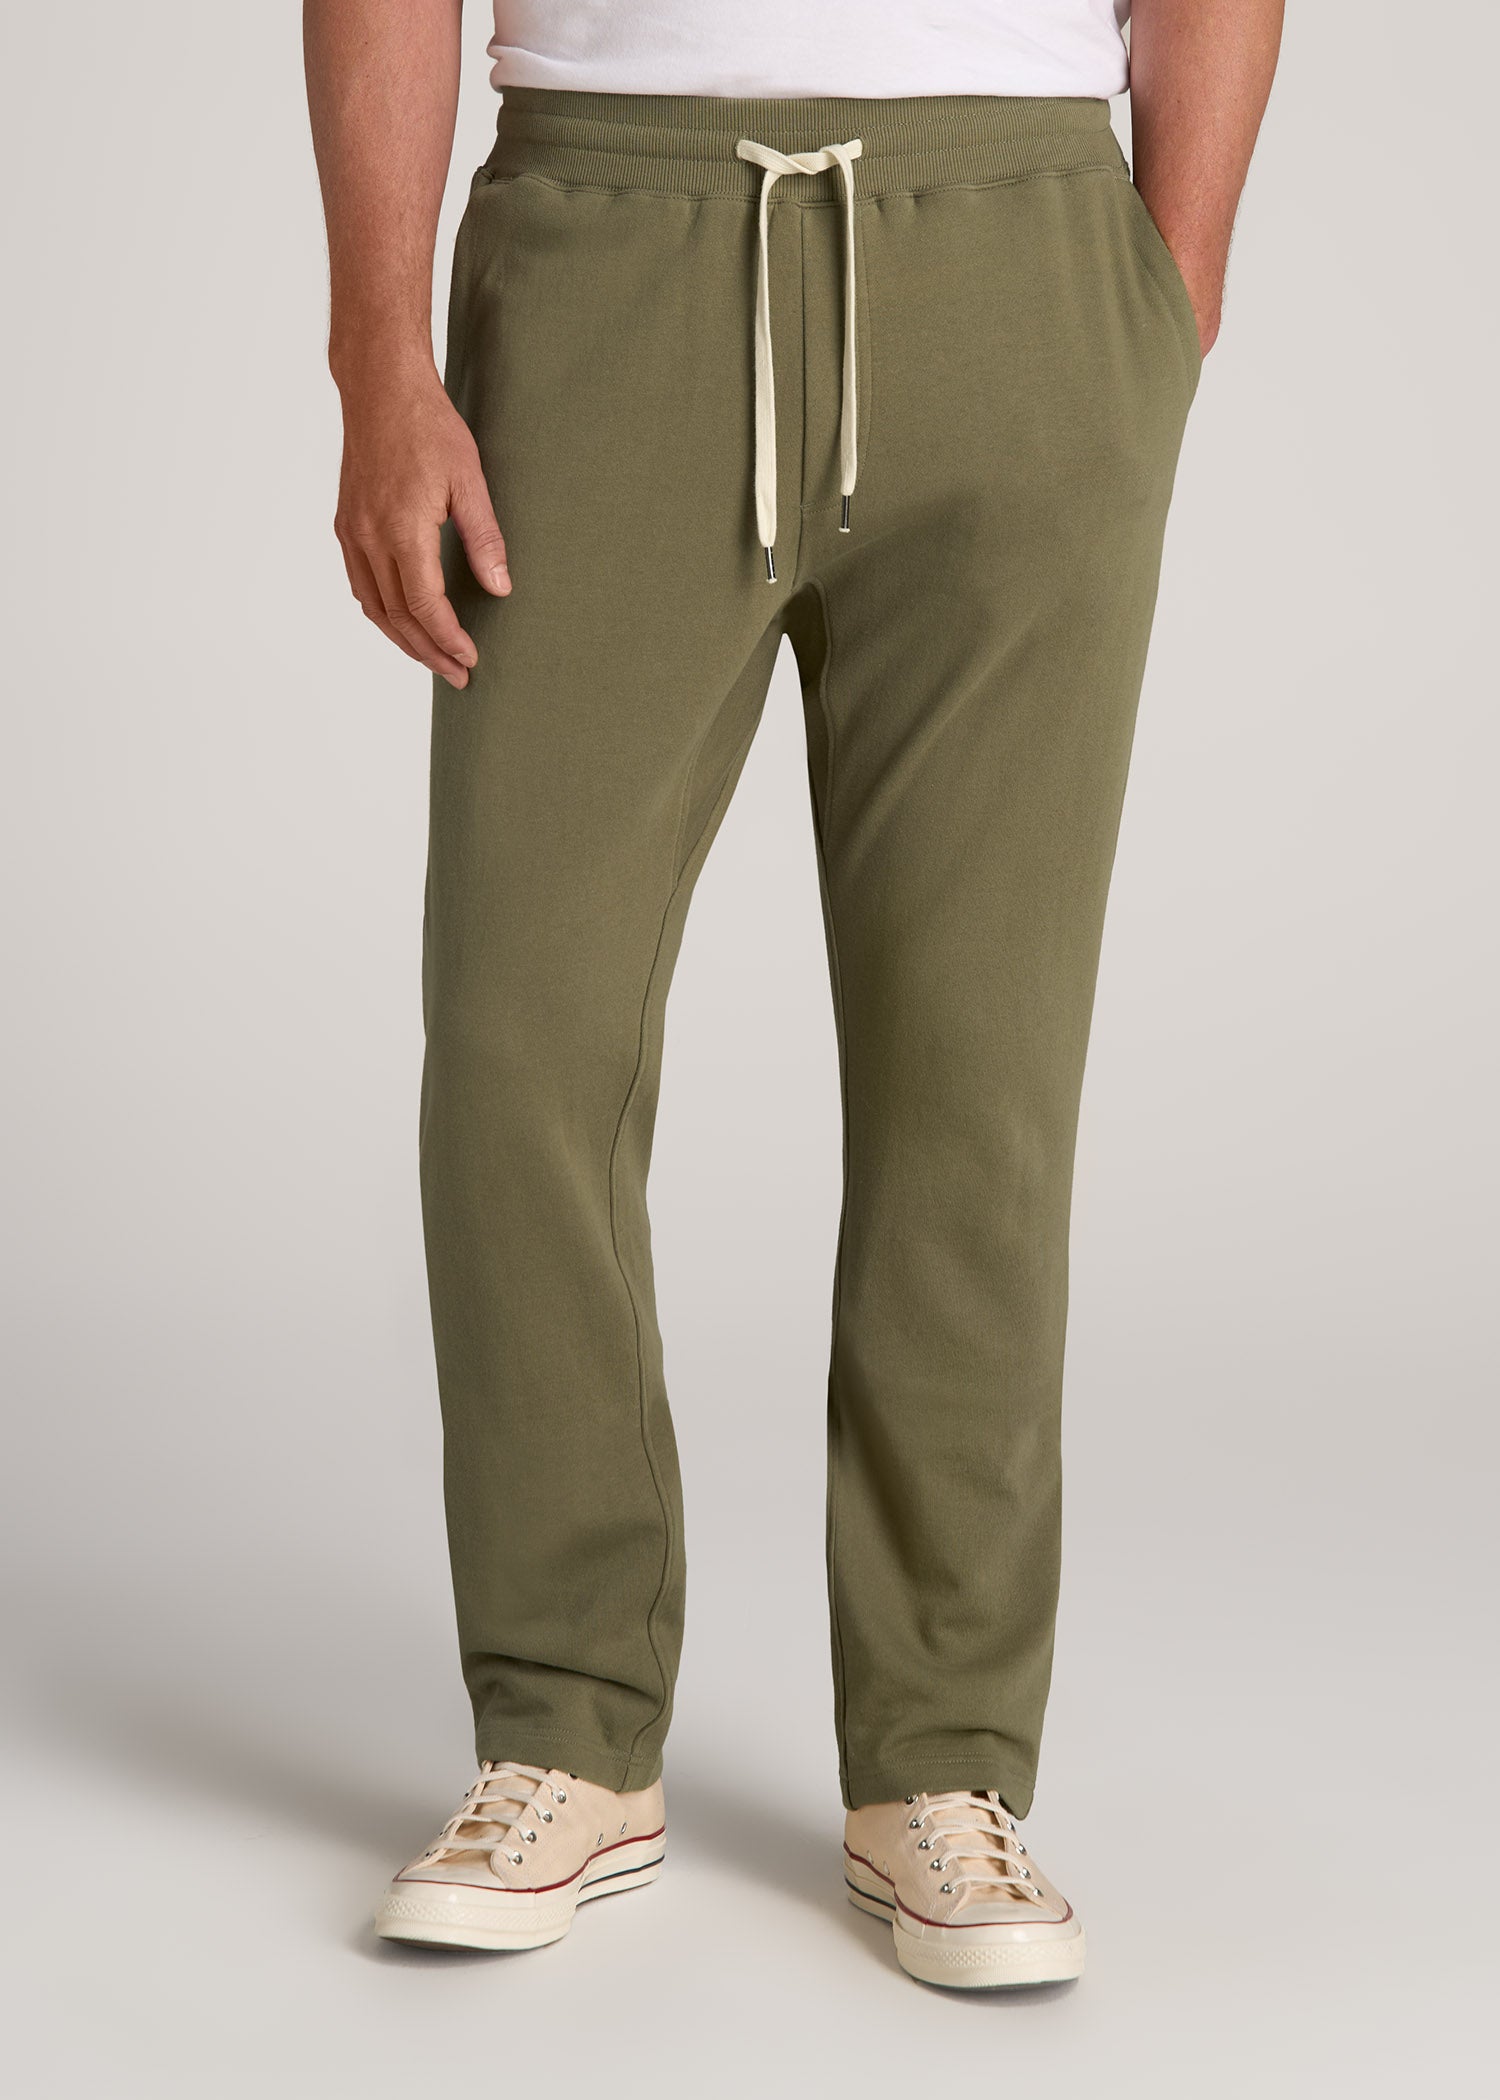 LJ Brushed Terrycloth Pants for Tall Men | American Tall